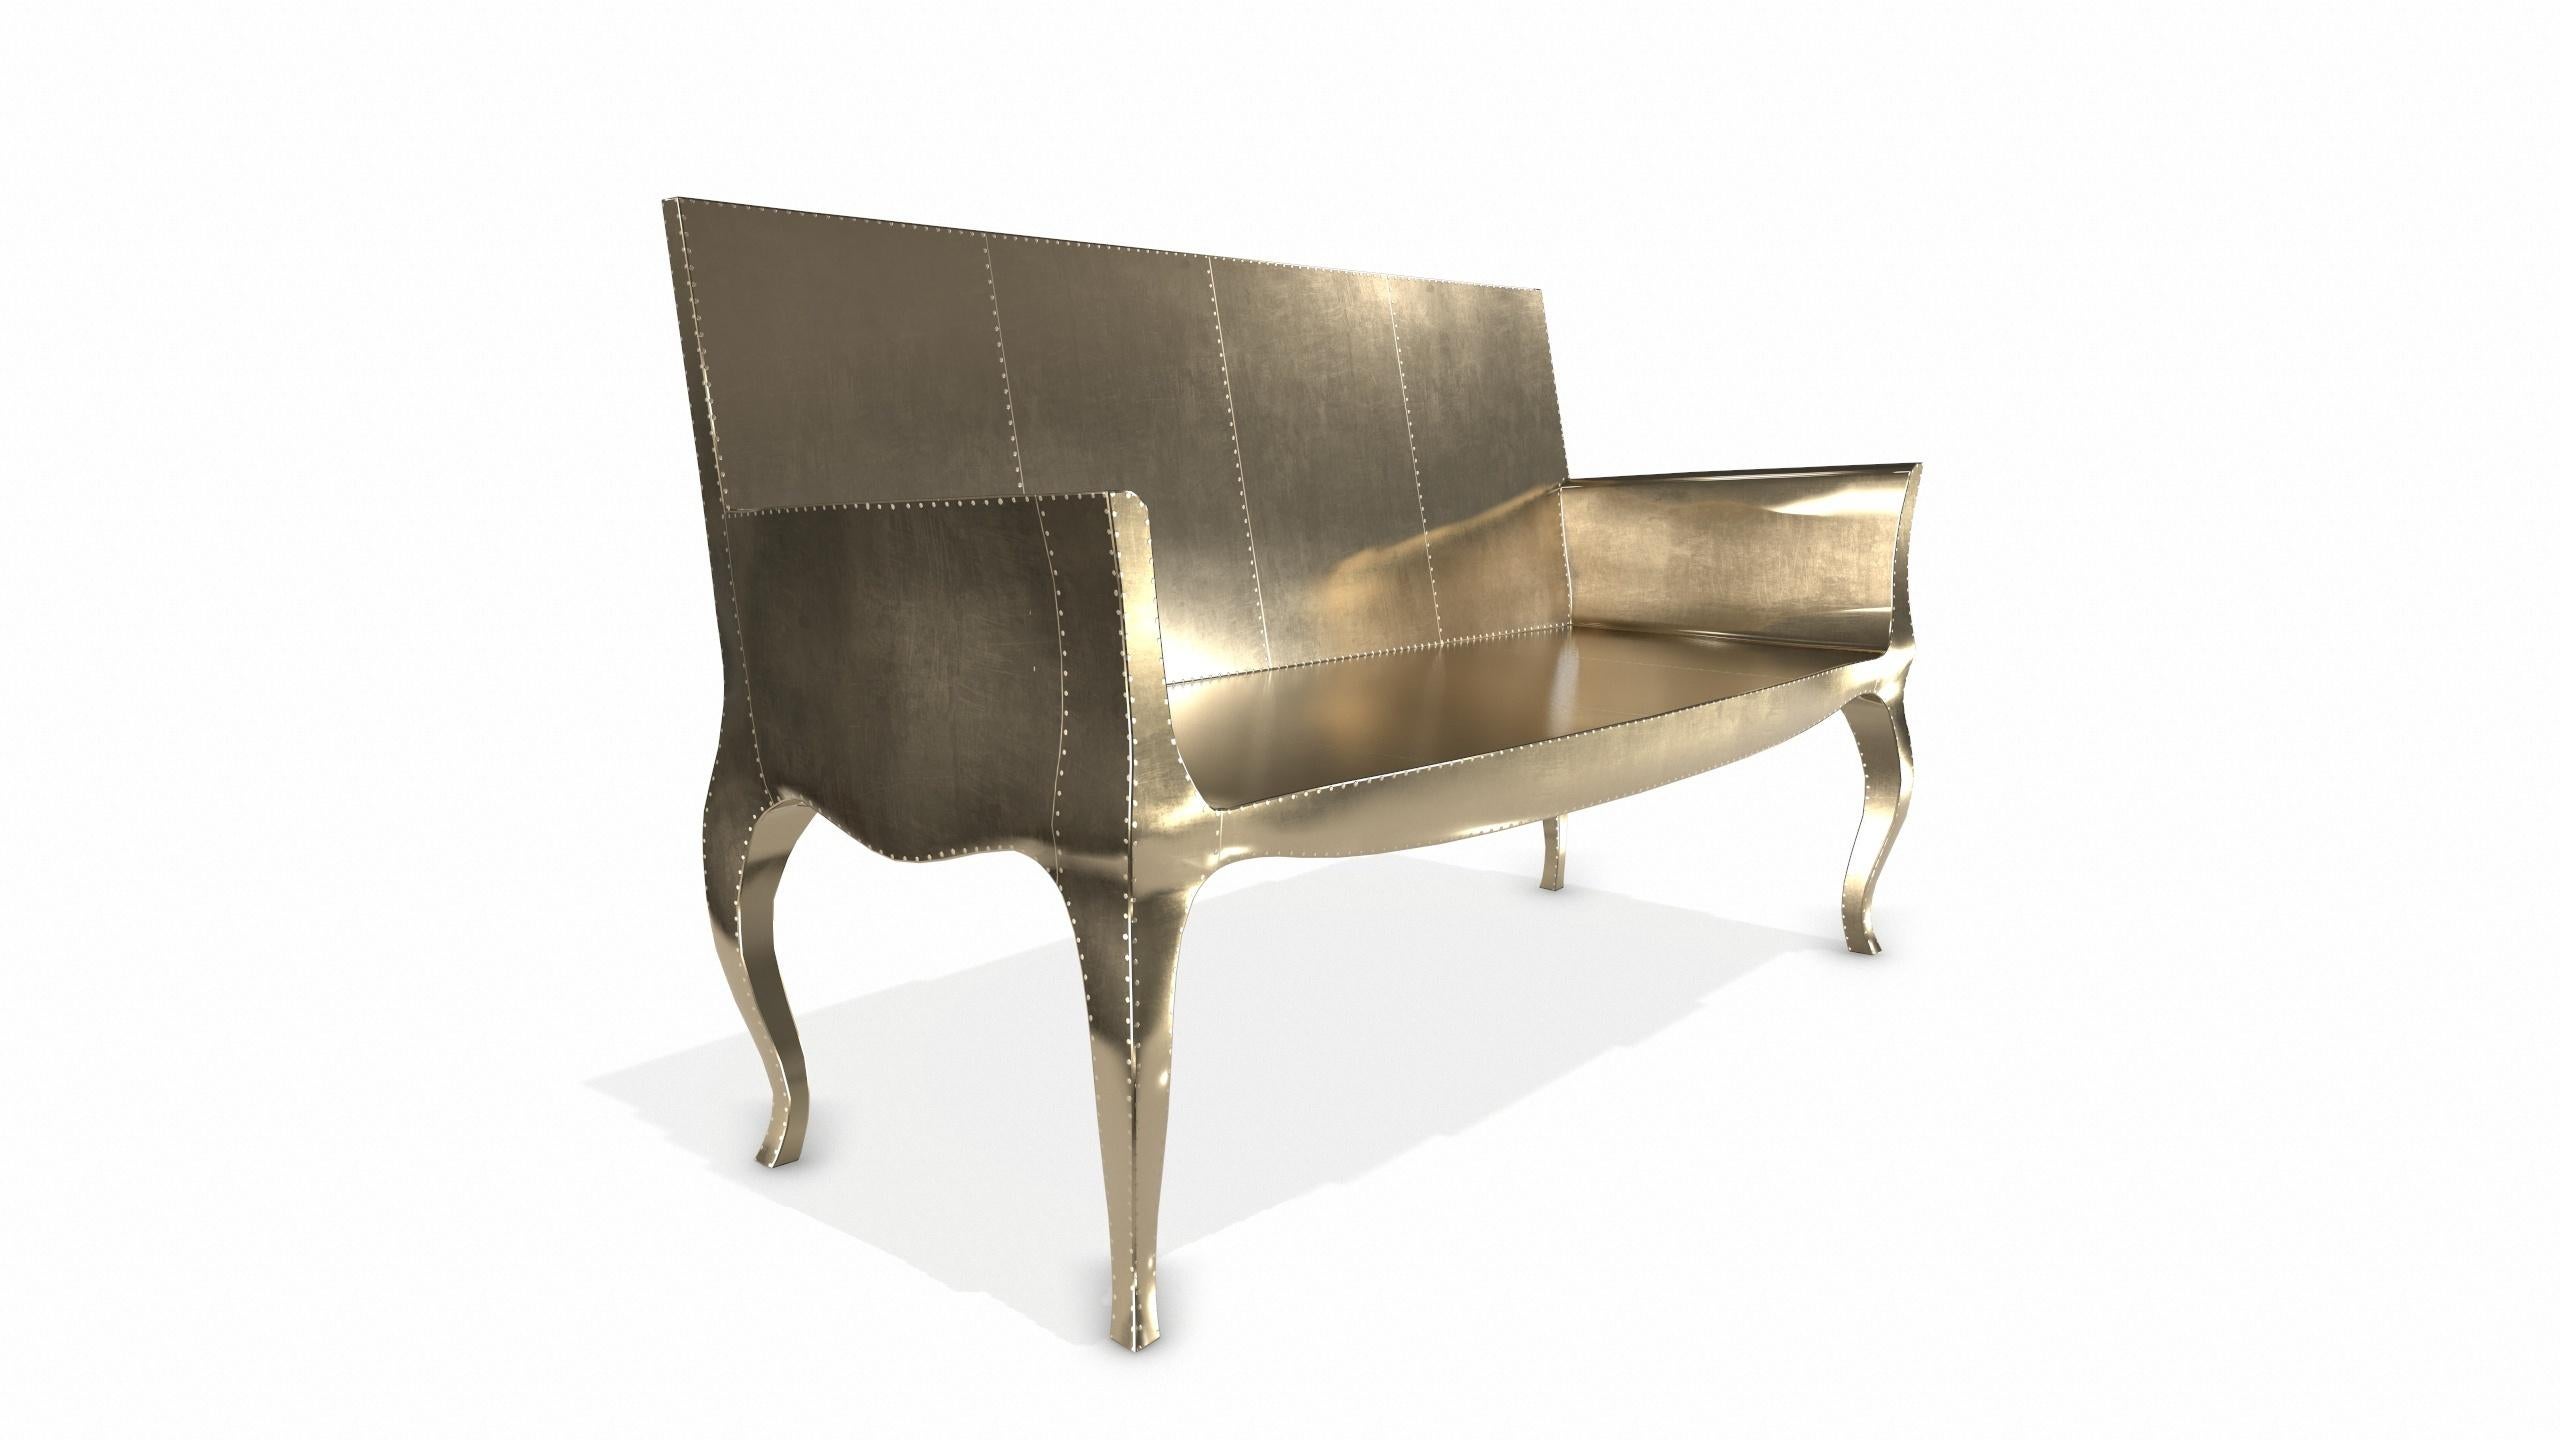 Louise Settee Art Deco Chaise Longues in Smooth Brass by Paul Mathieu In New Condition For Sale In New York, NY